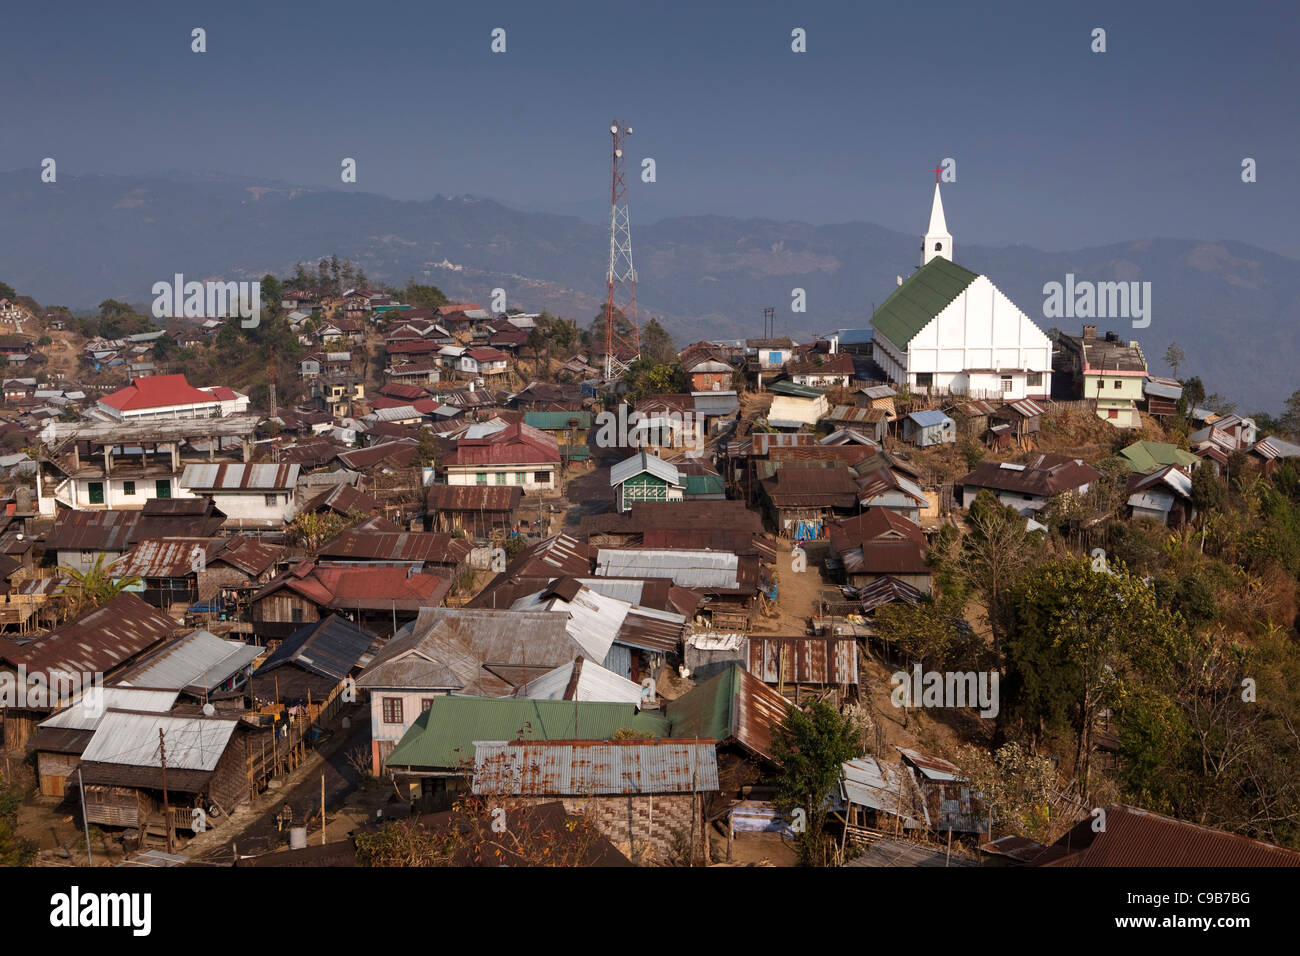 India, Nagaland, Longkhum, christian church occupying prominent position on hilltop Stock Photo